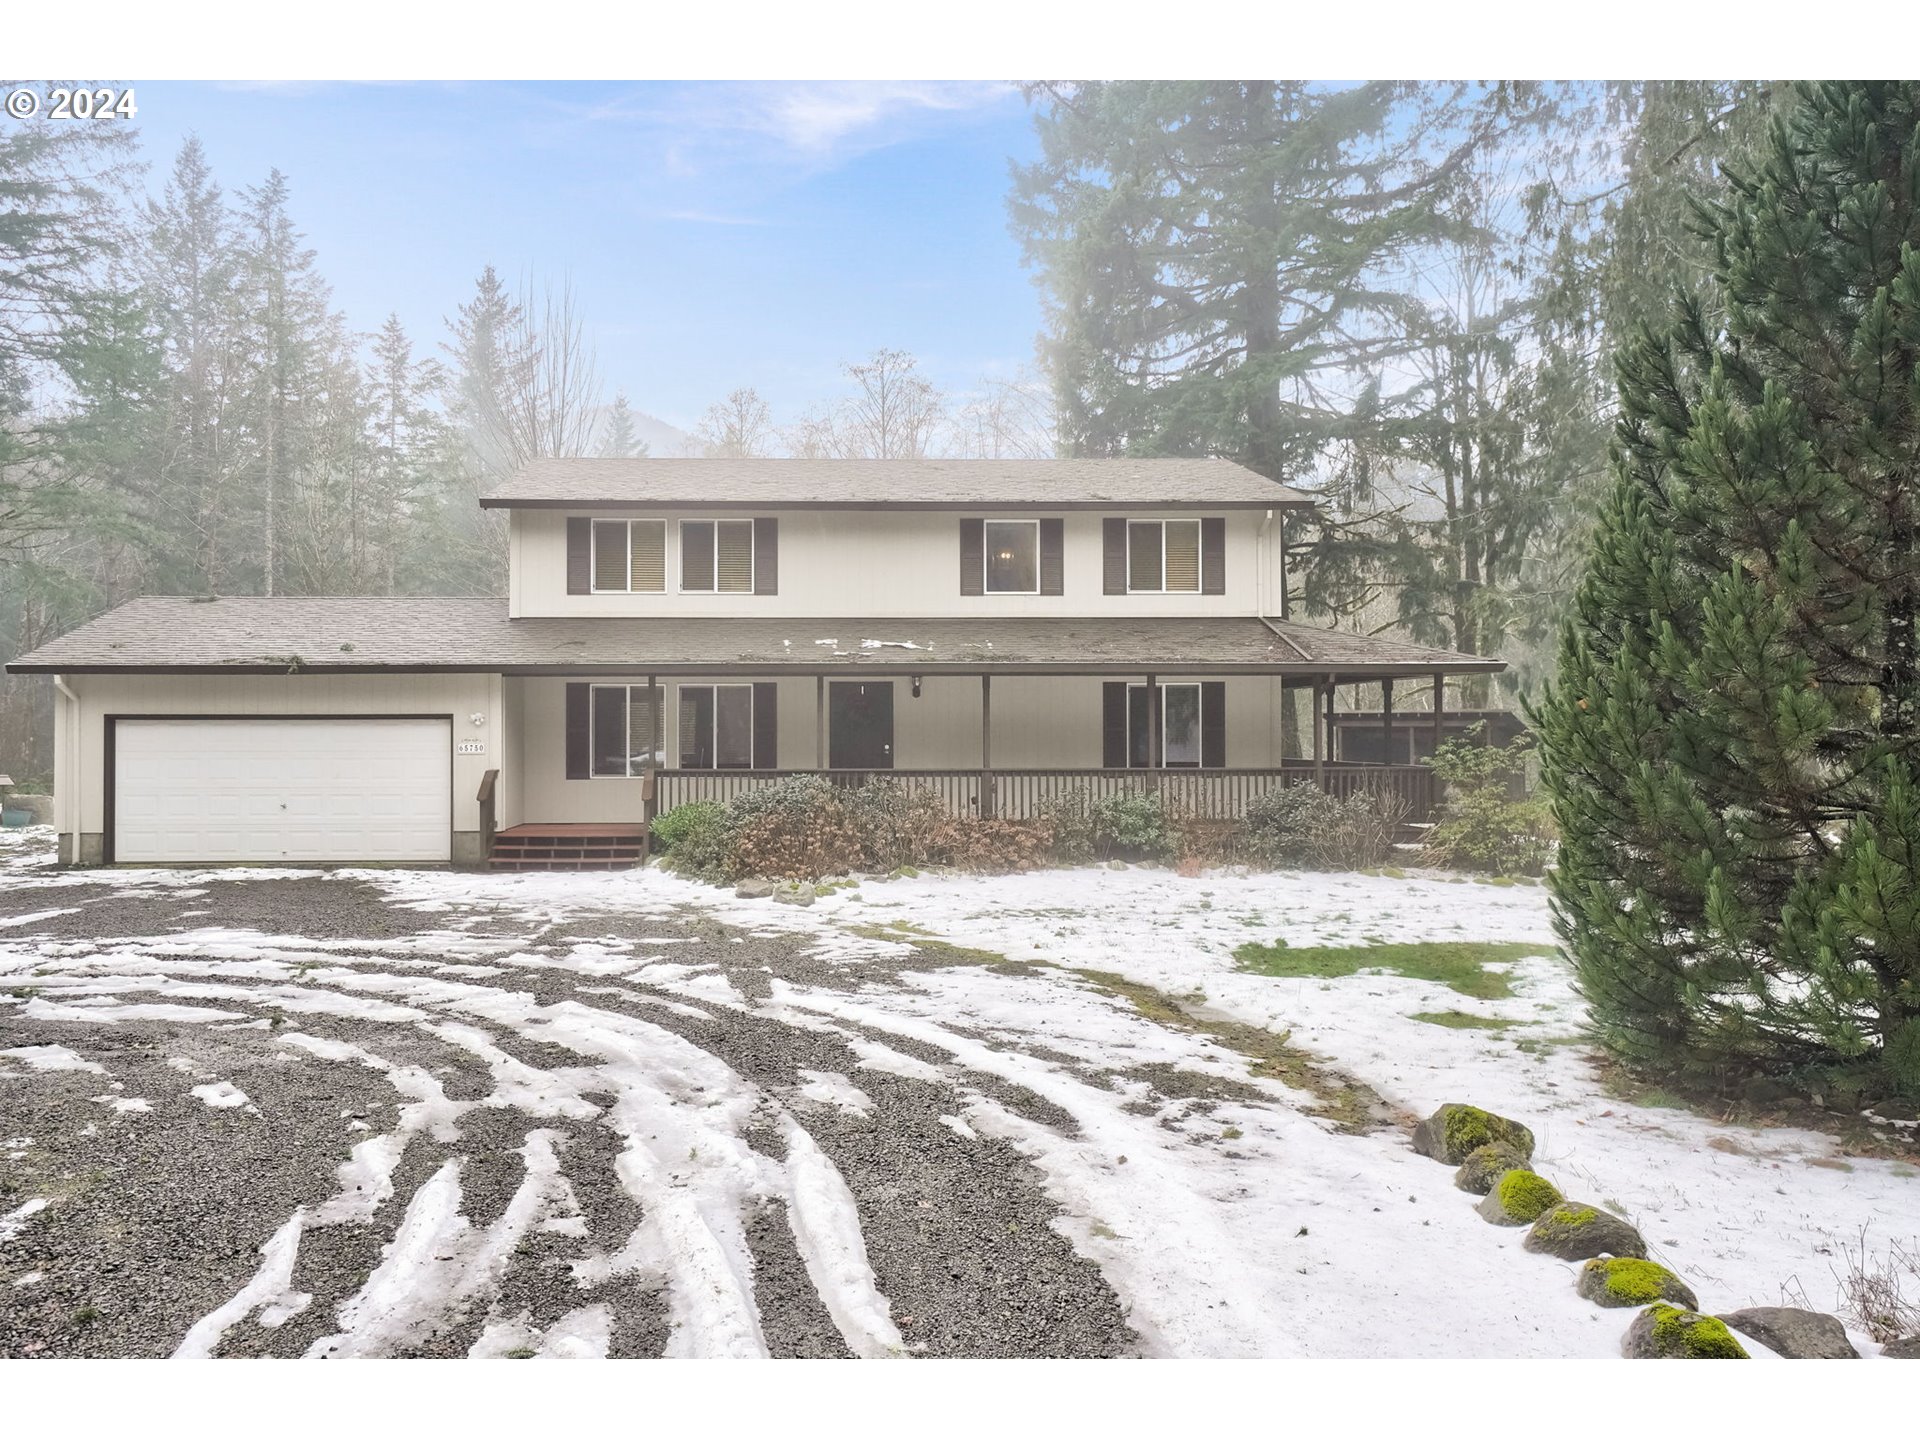 65750 E CHIPPAWA LN, Rhododendron, OR 